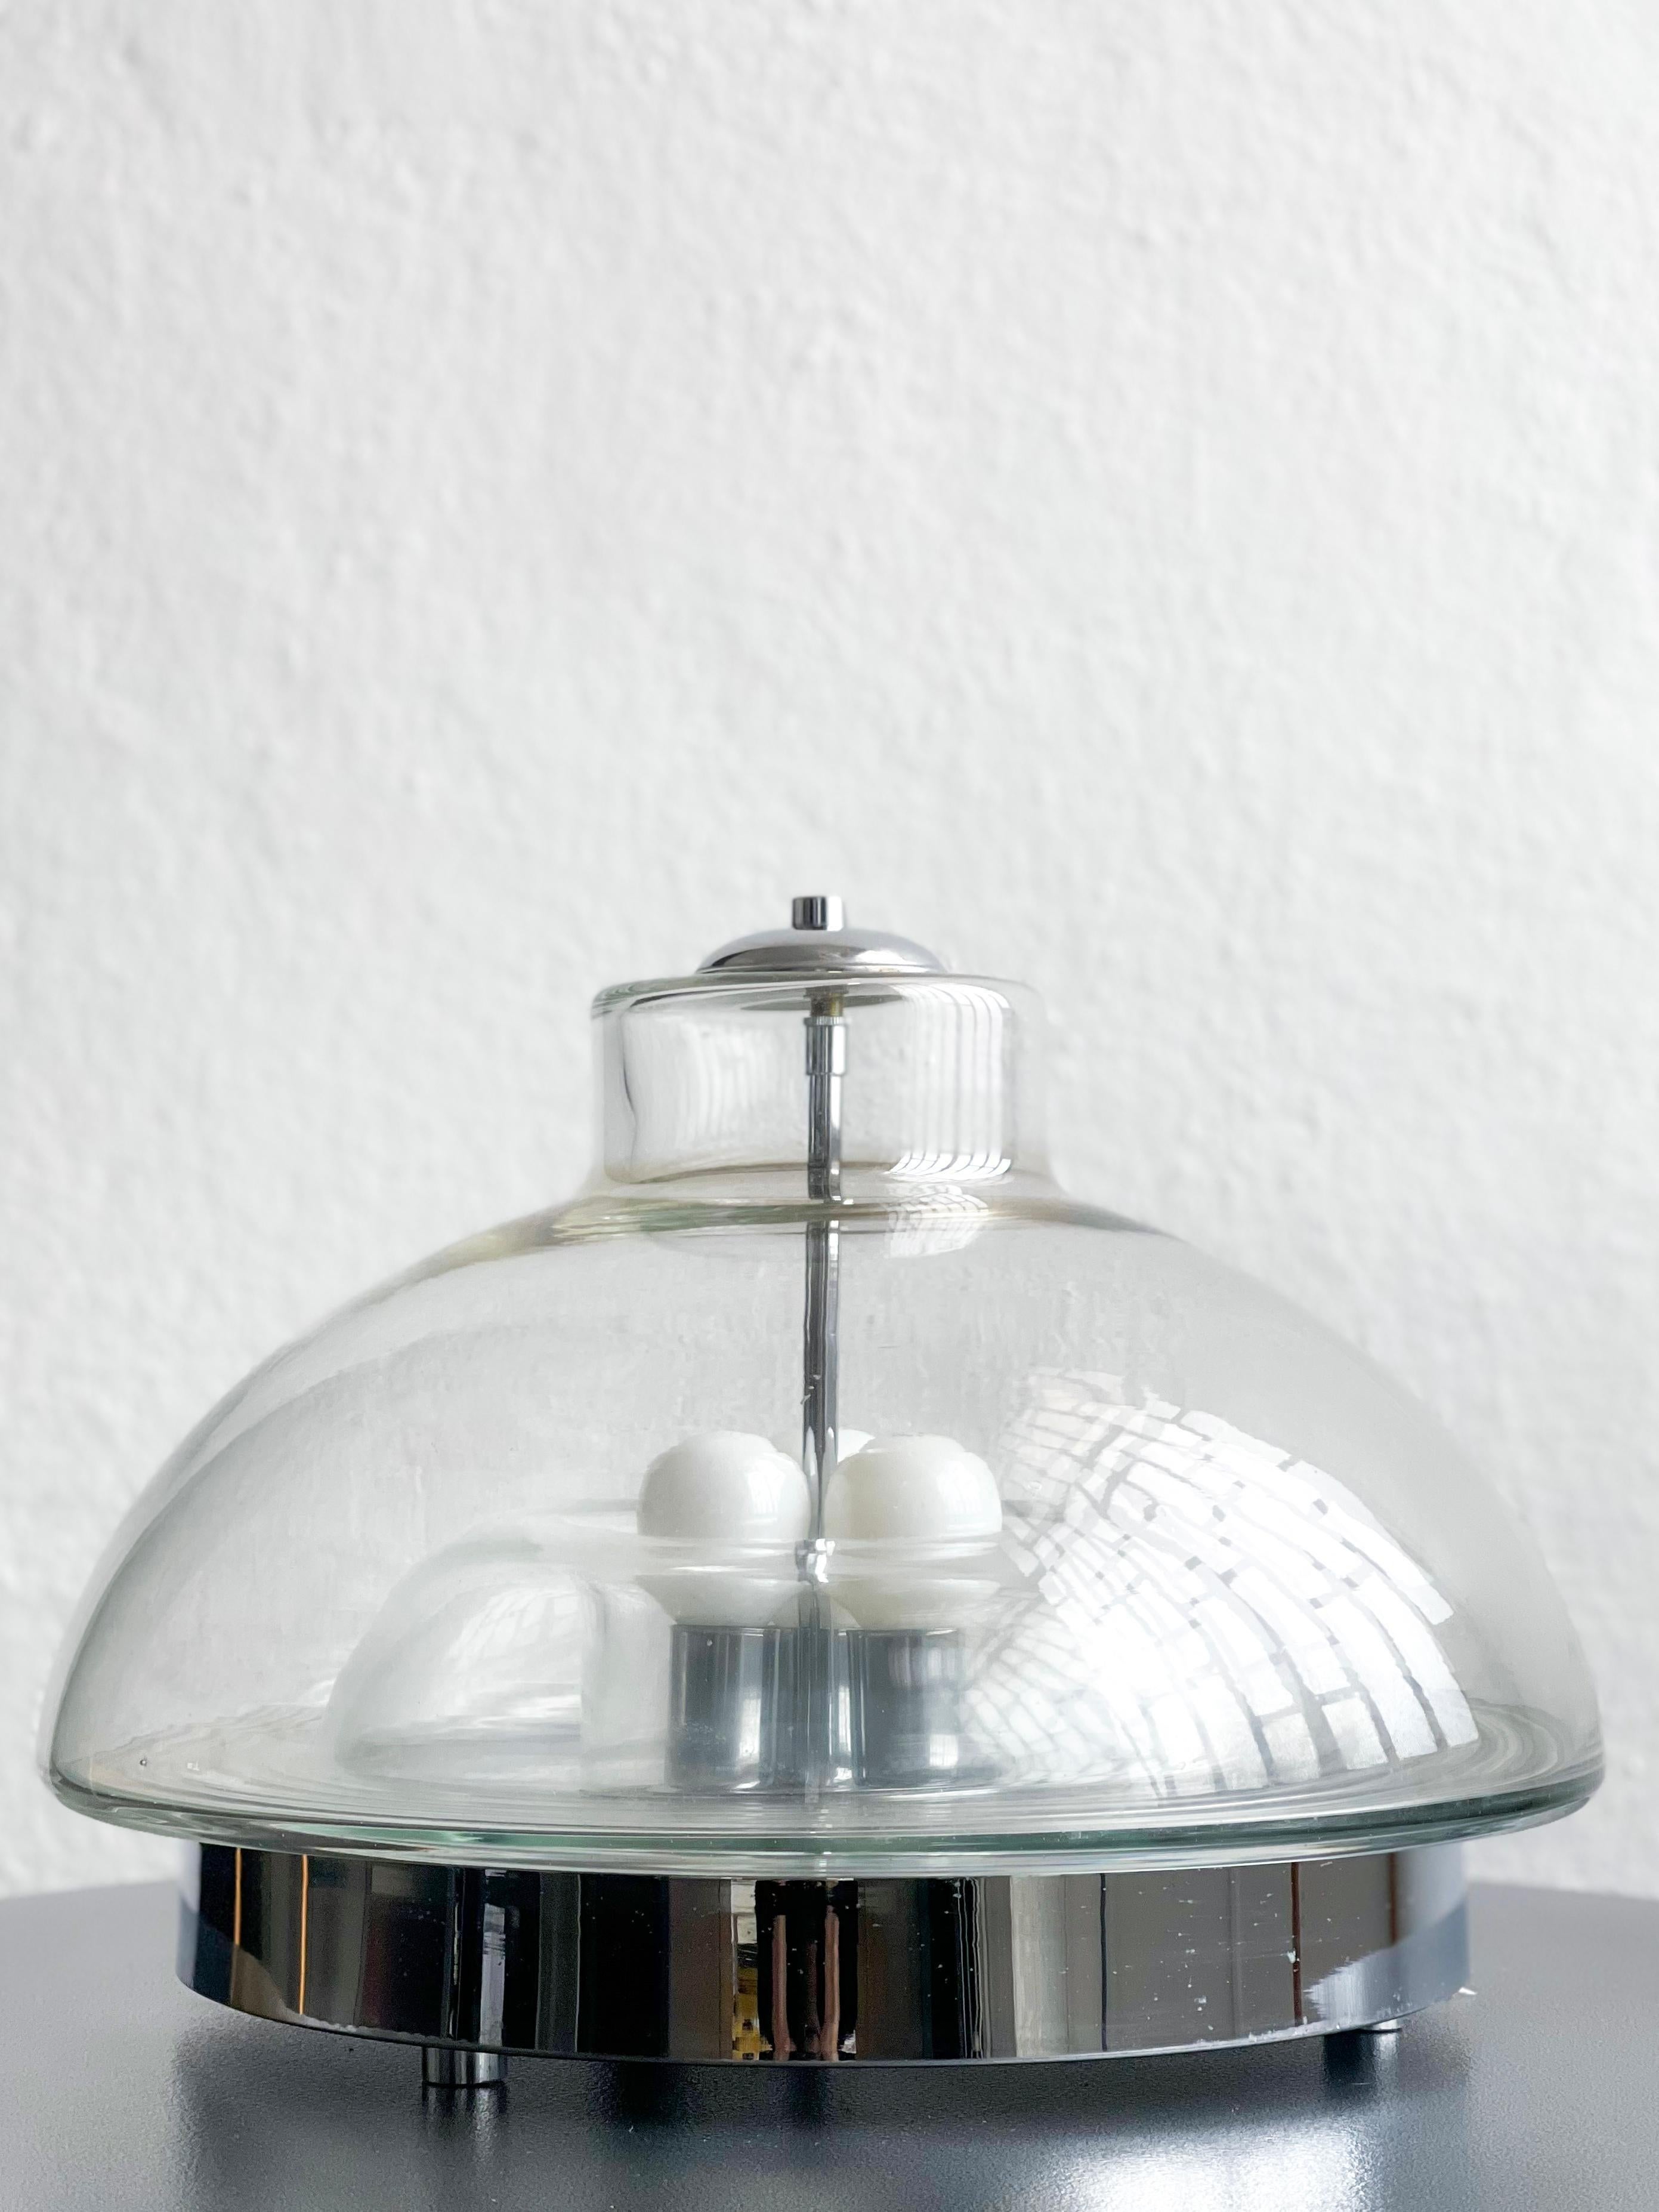 Decorative Living Room Lamp in Metal and Glass, Space Age, Italian Collectible In Good Condition For Sale In Milan, IT